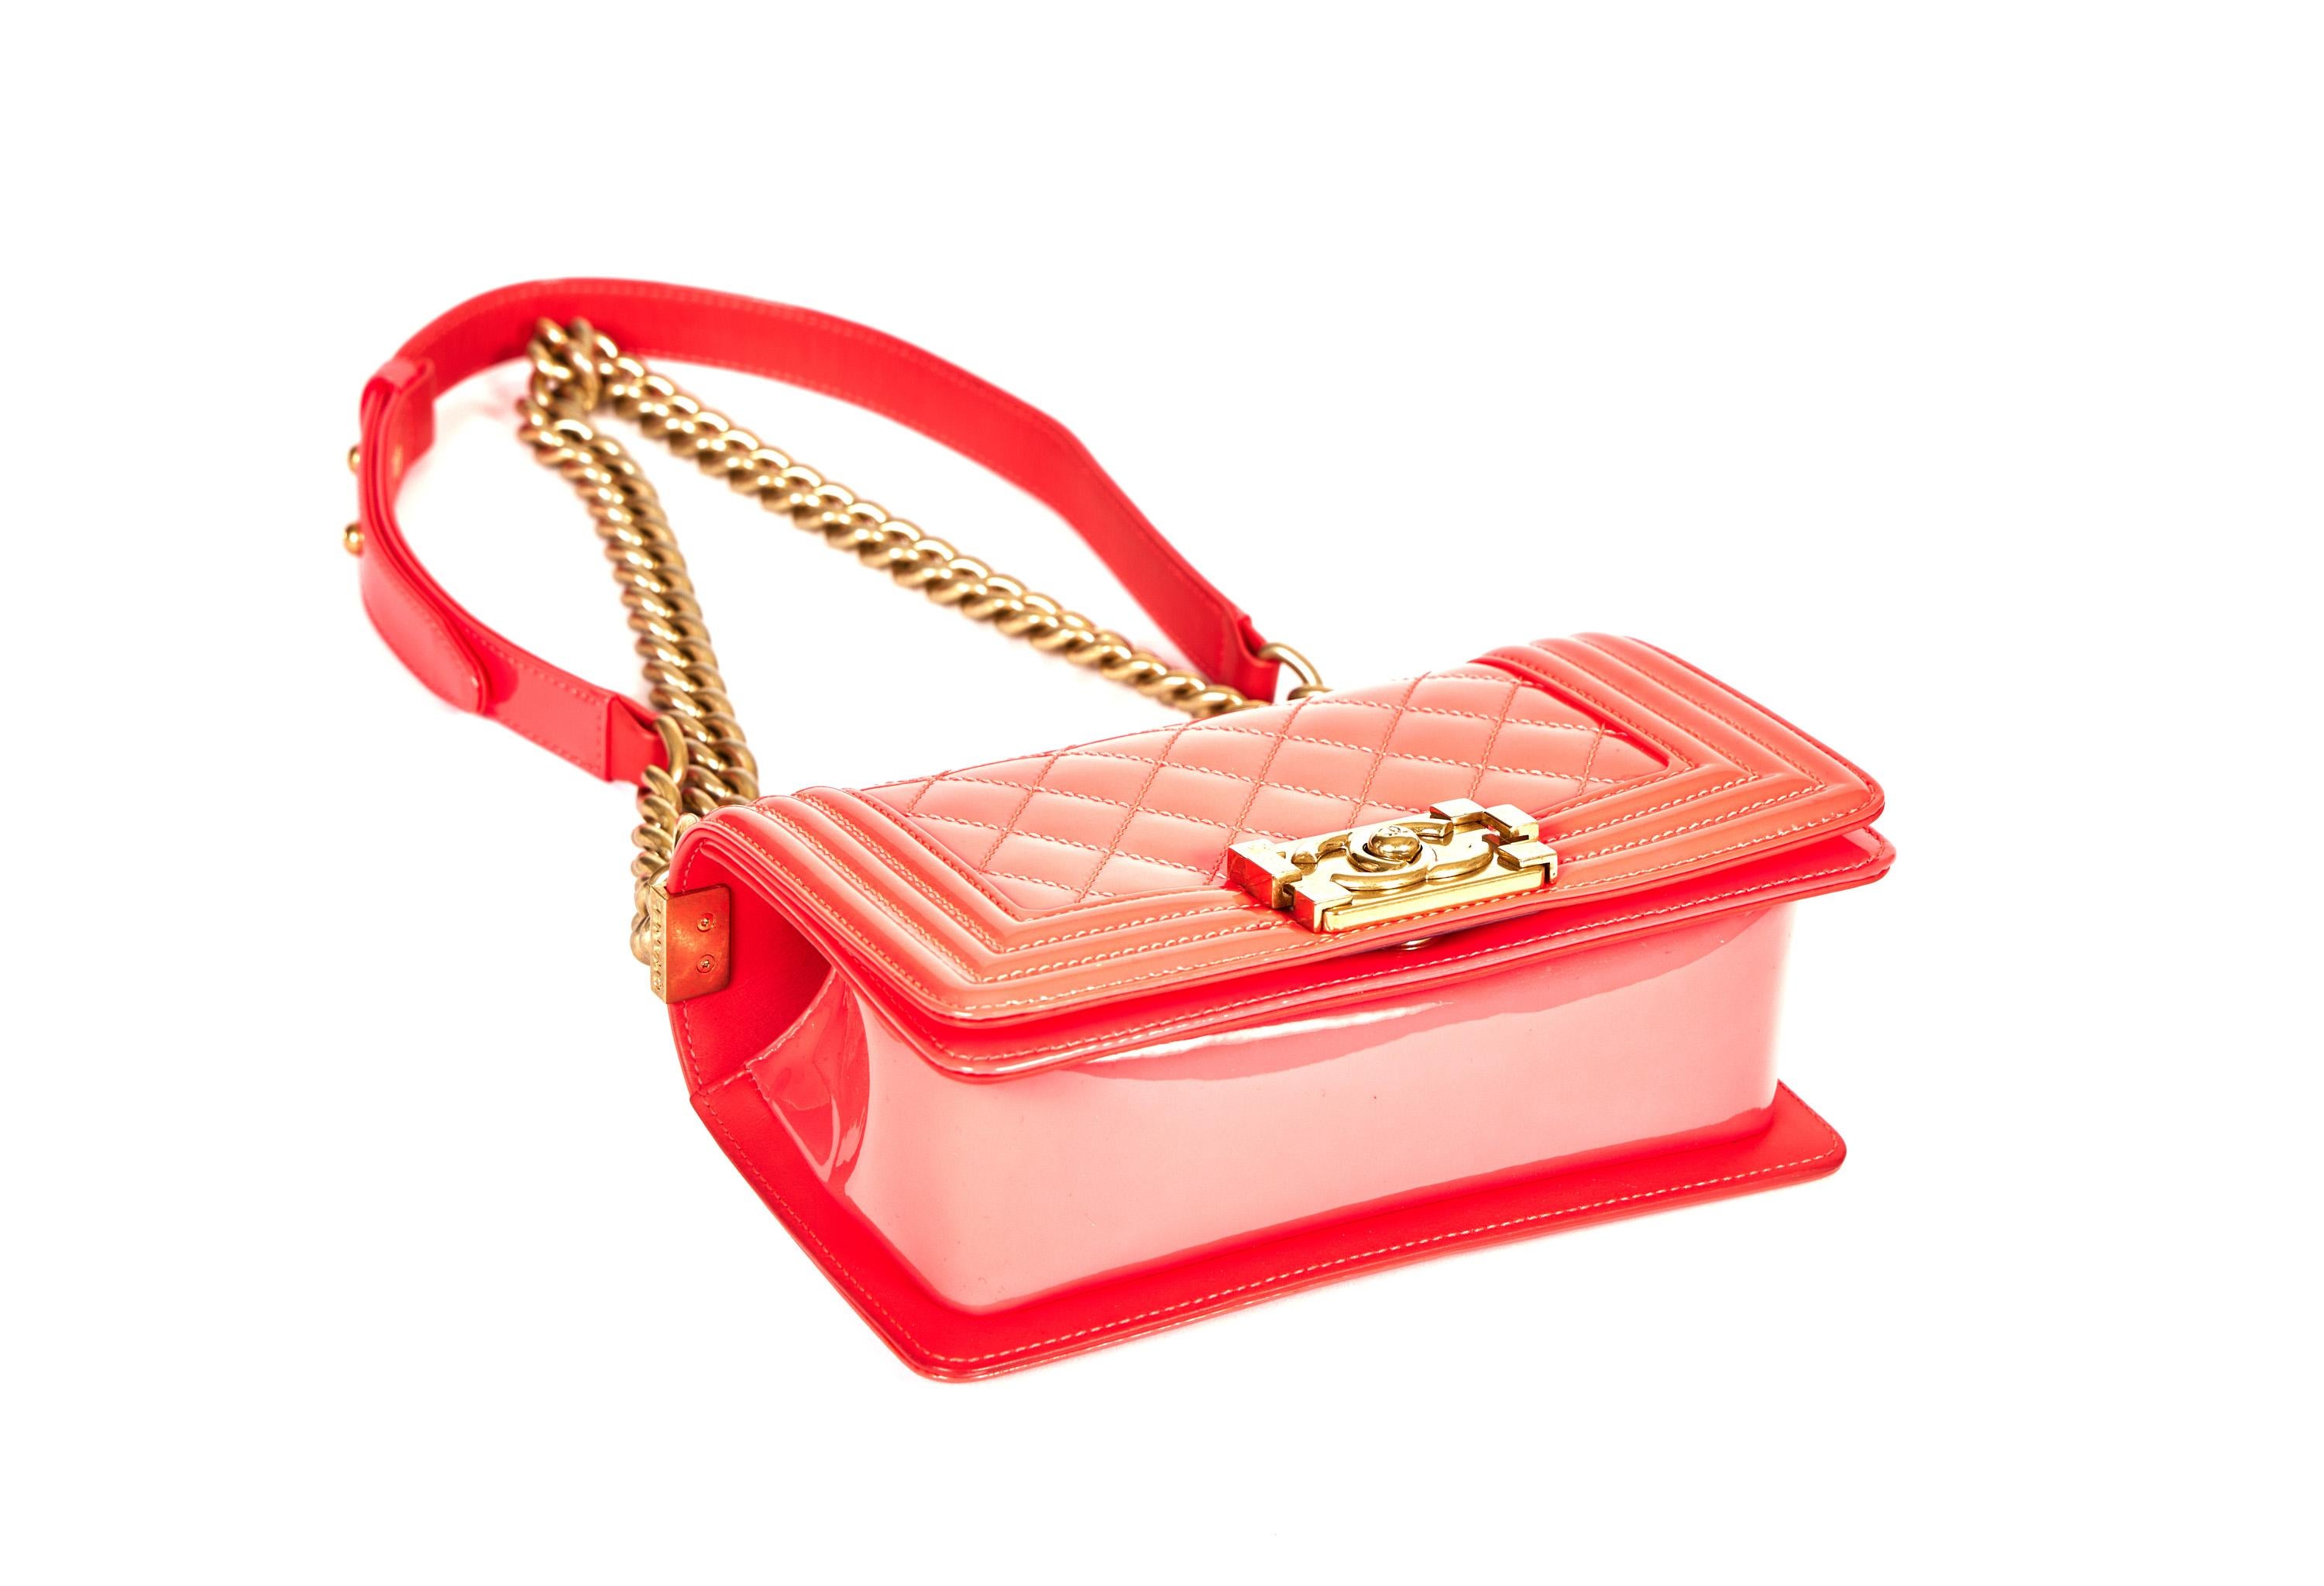 New Chanel Fluorescent Patent Pink Boy Bag 2